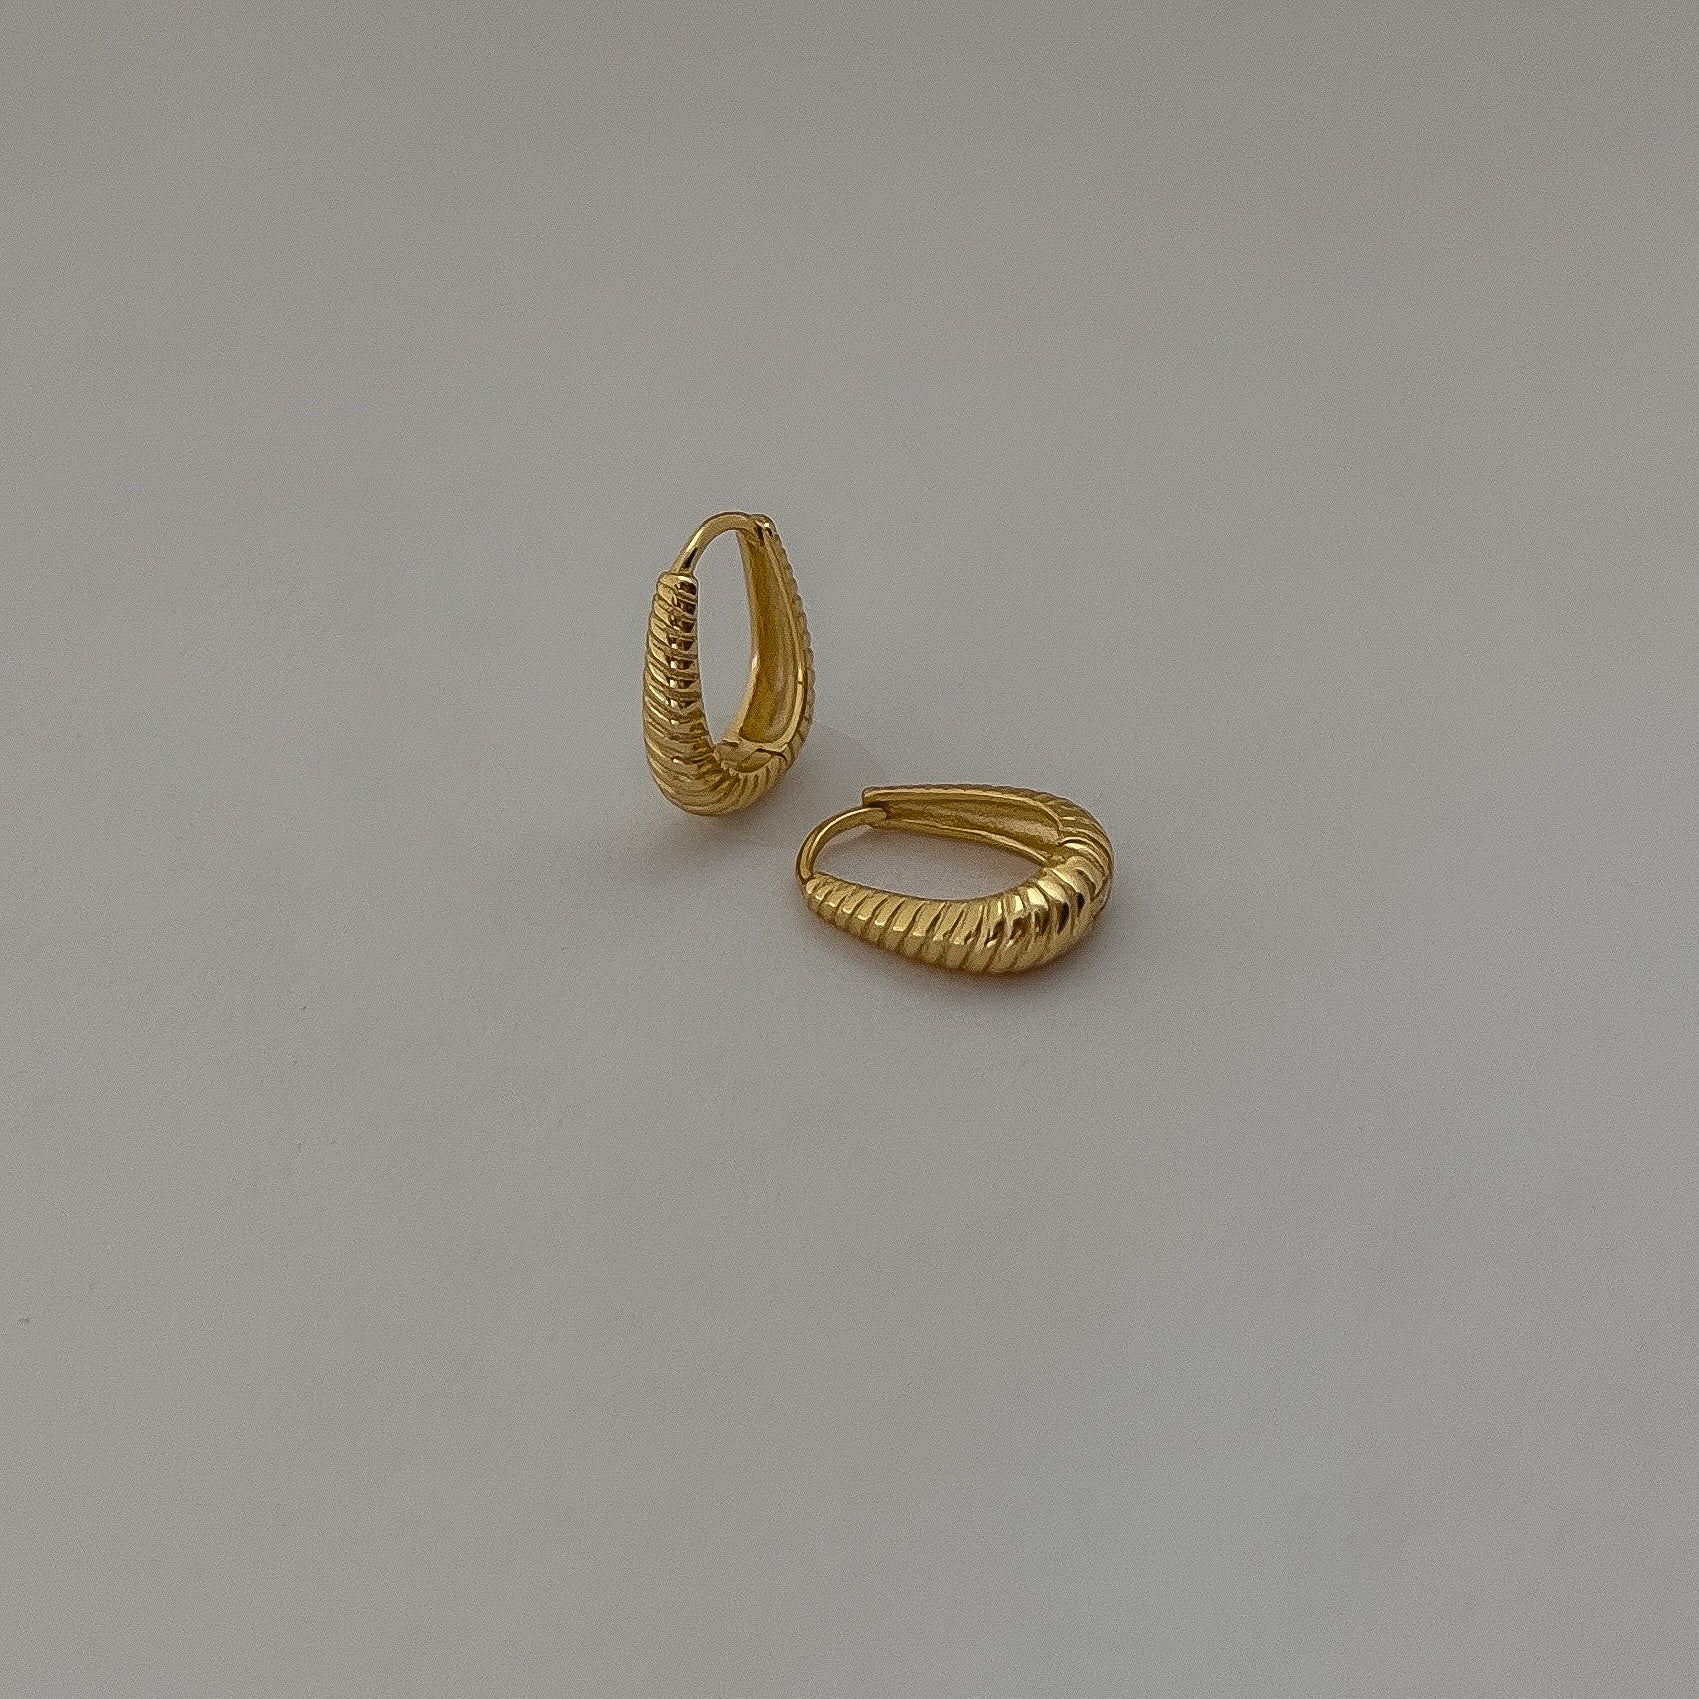 subtle teardrop shape, these retro inspired ribbed huggie hoop earrings are crafted of Vermeil (14K gold-plated sterling silver)